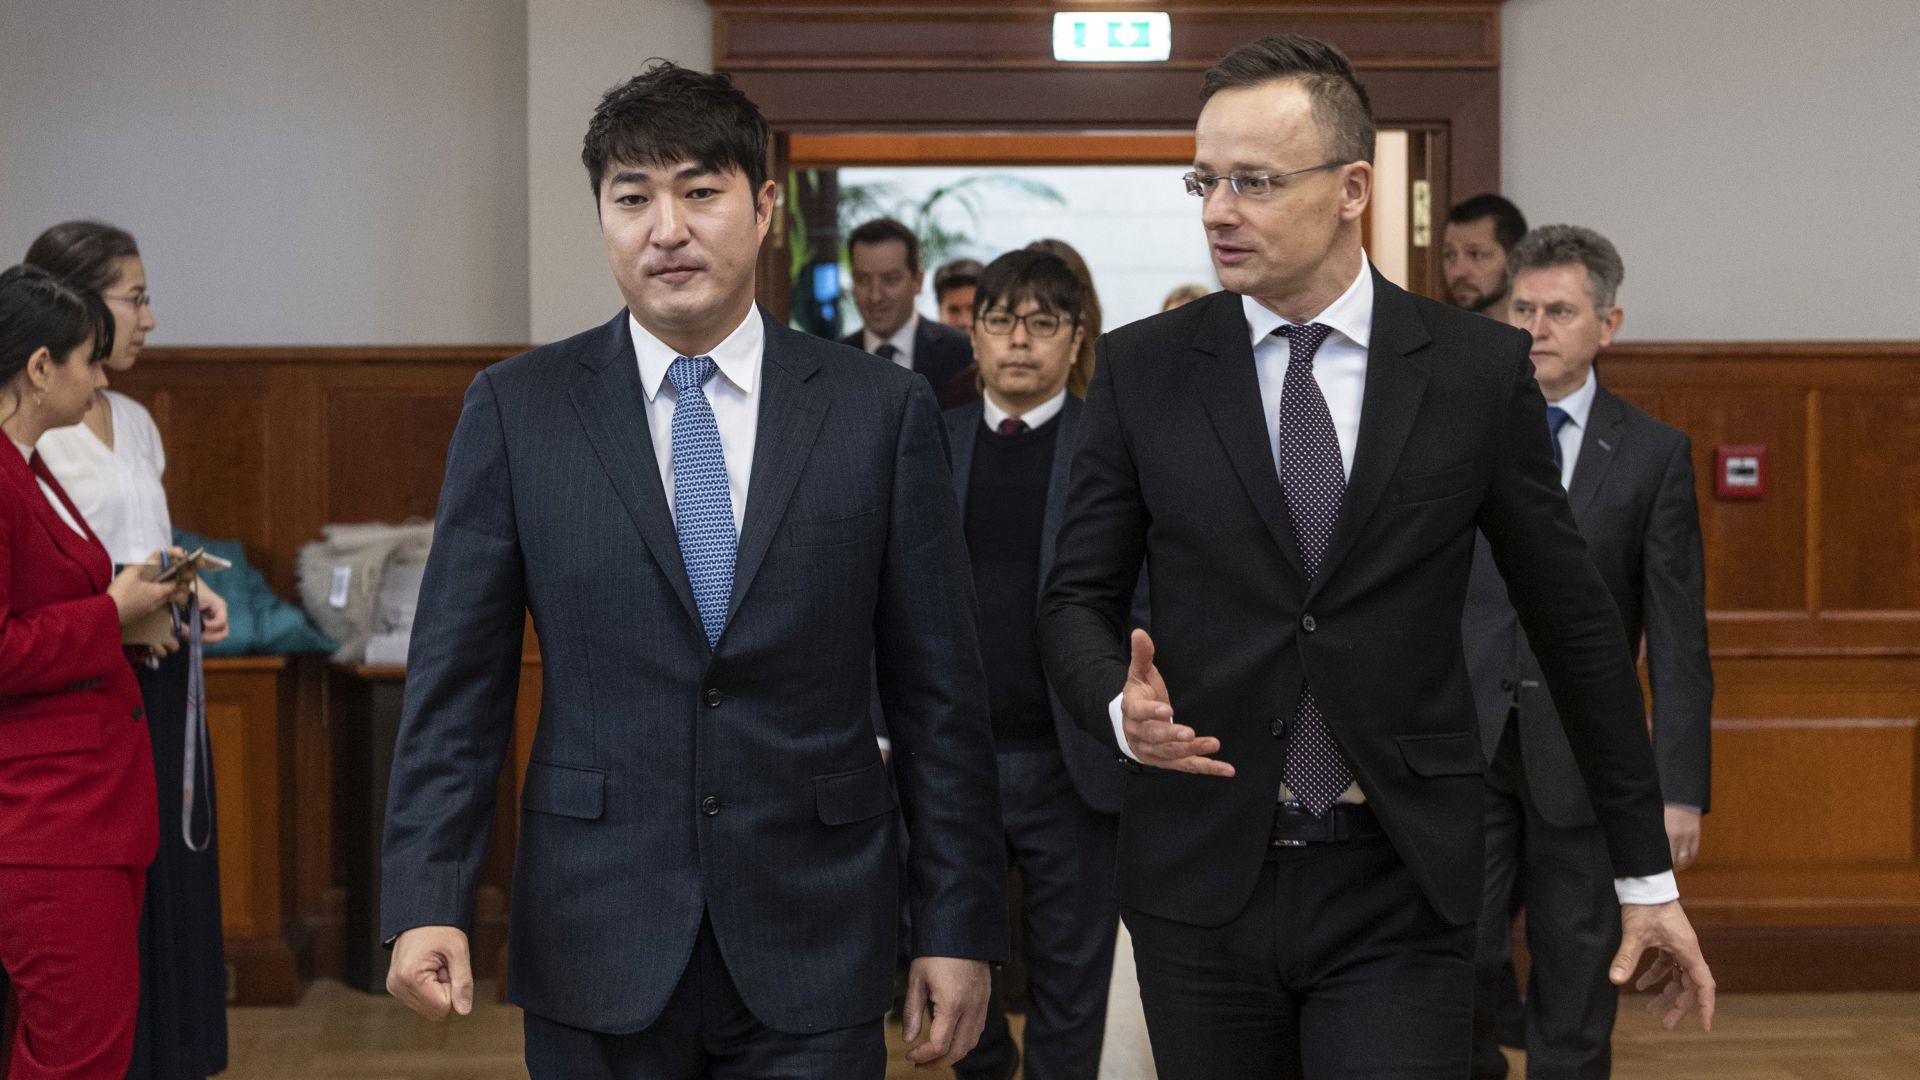 Péter Szijjártó, Minister of Foreign Affairs and Trade and Dominic Lee, CFO of Soulbrain